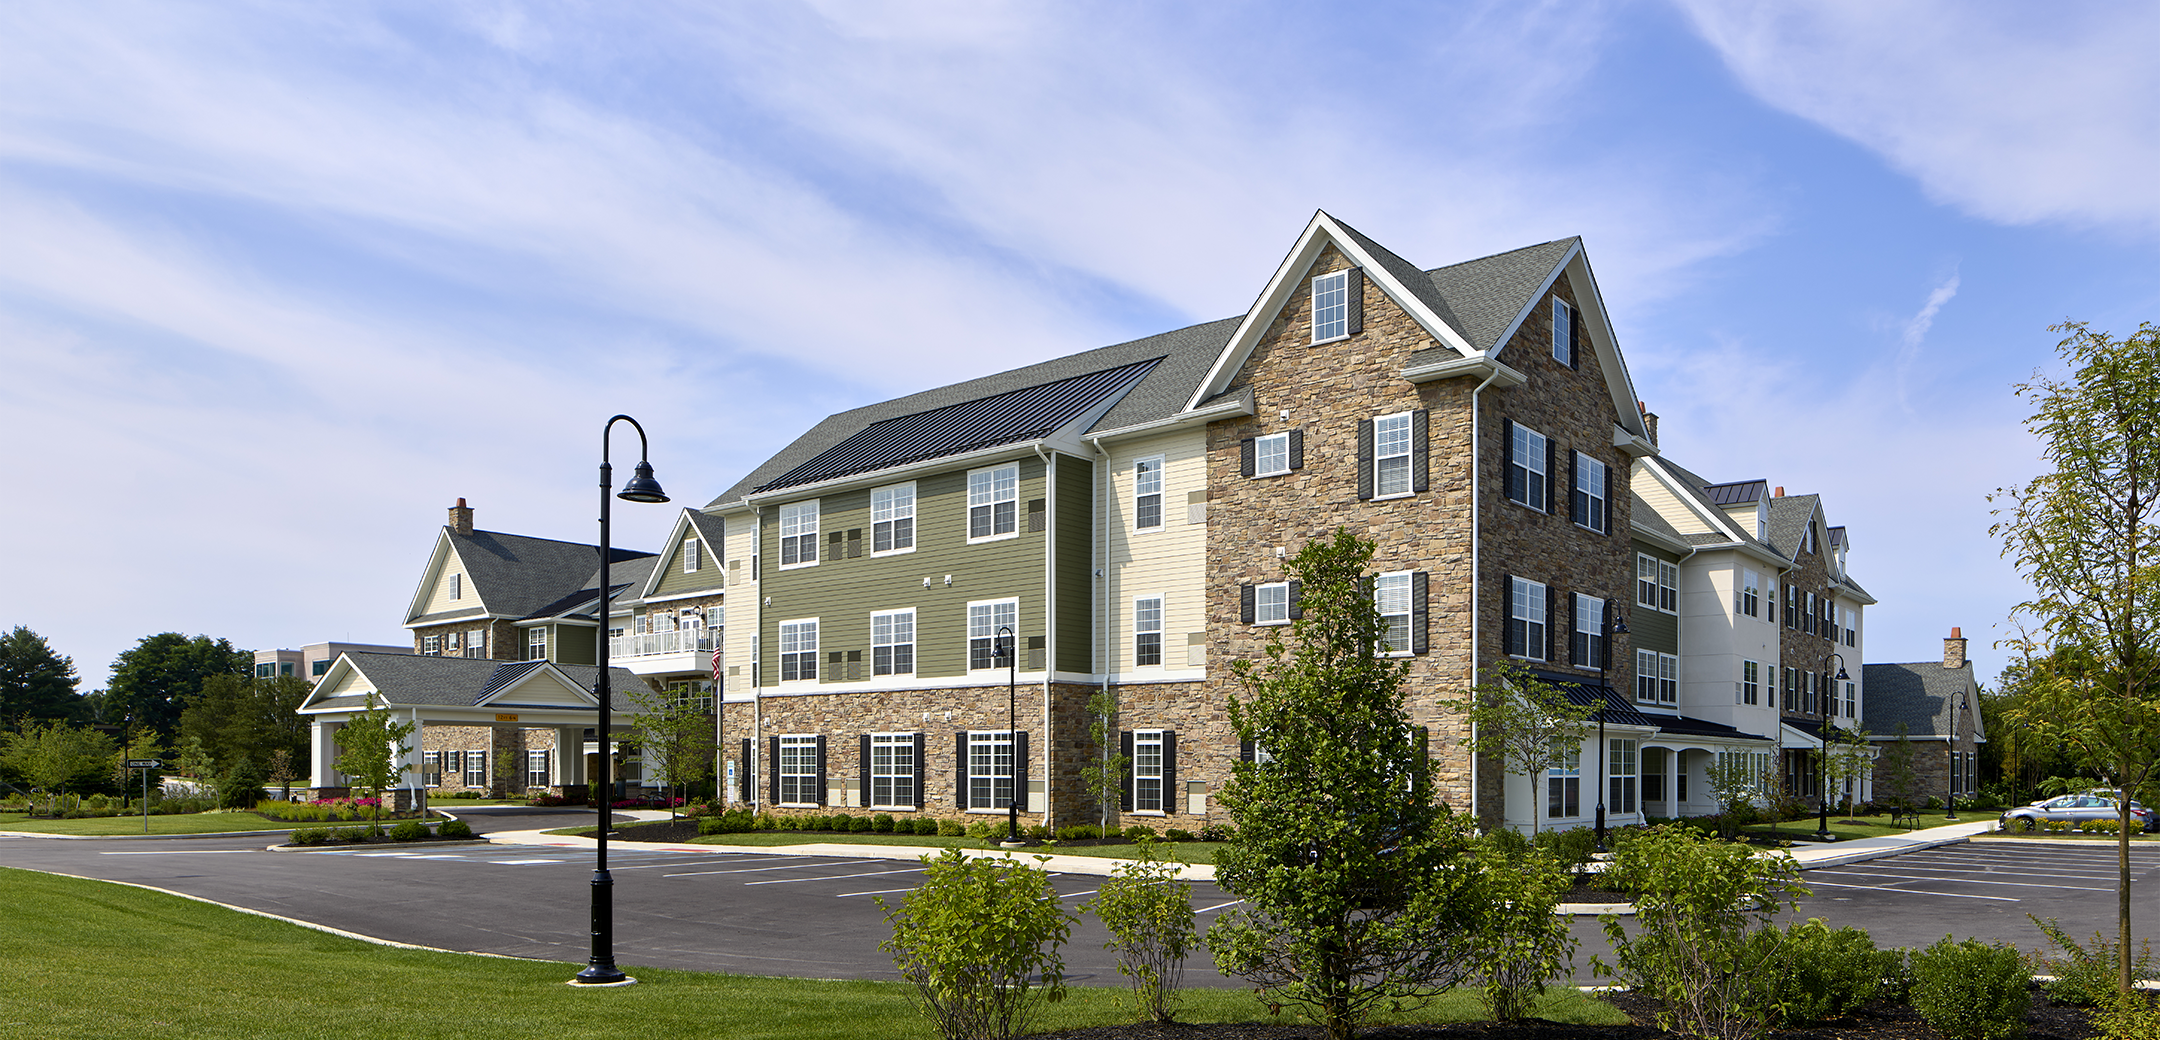 An angled exterior view of the Arbor Terrace Exton showcasing the side parking lot, front overhang entrance with a driveway and green grass in the foreground.